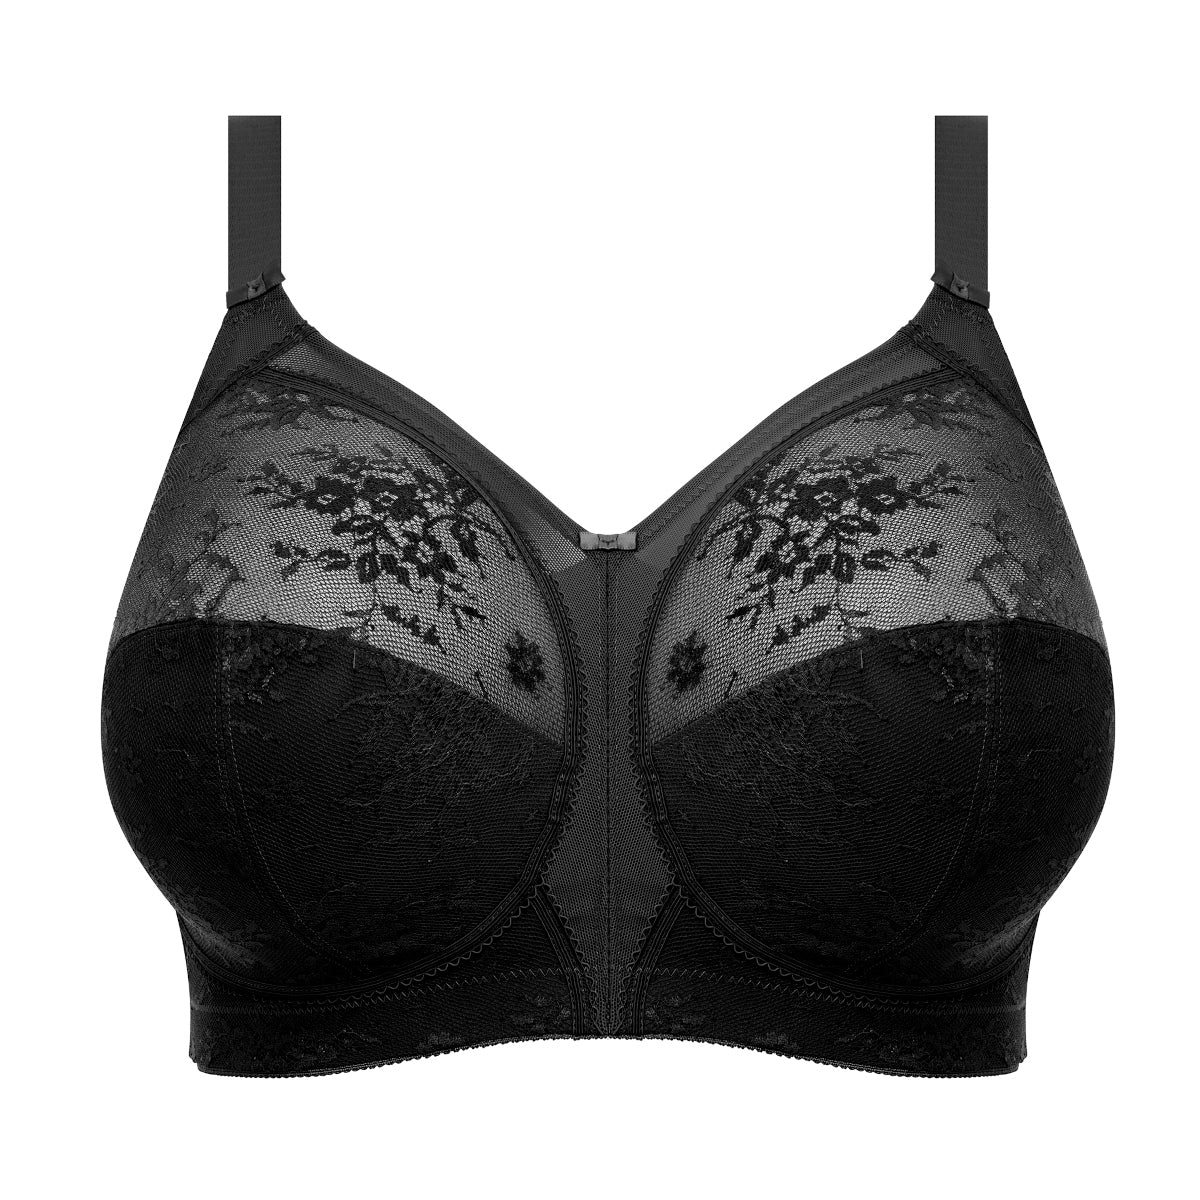 New Arrival: Wholesale Deep V Black Invisilift Bra With Love And